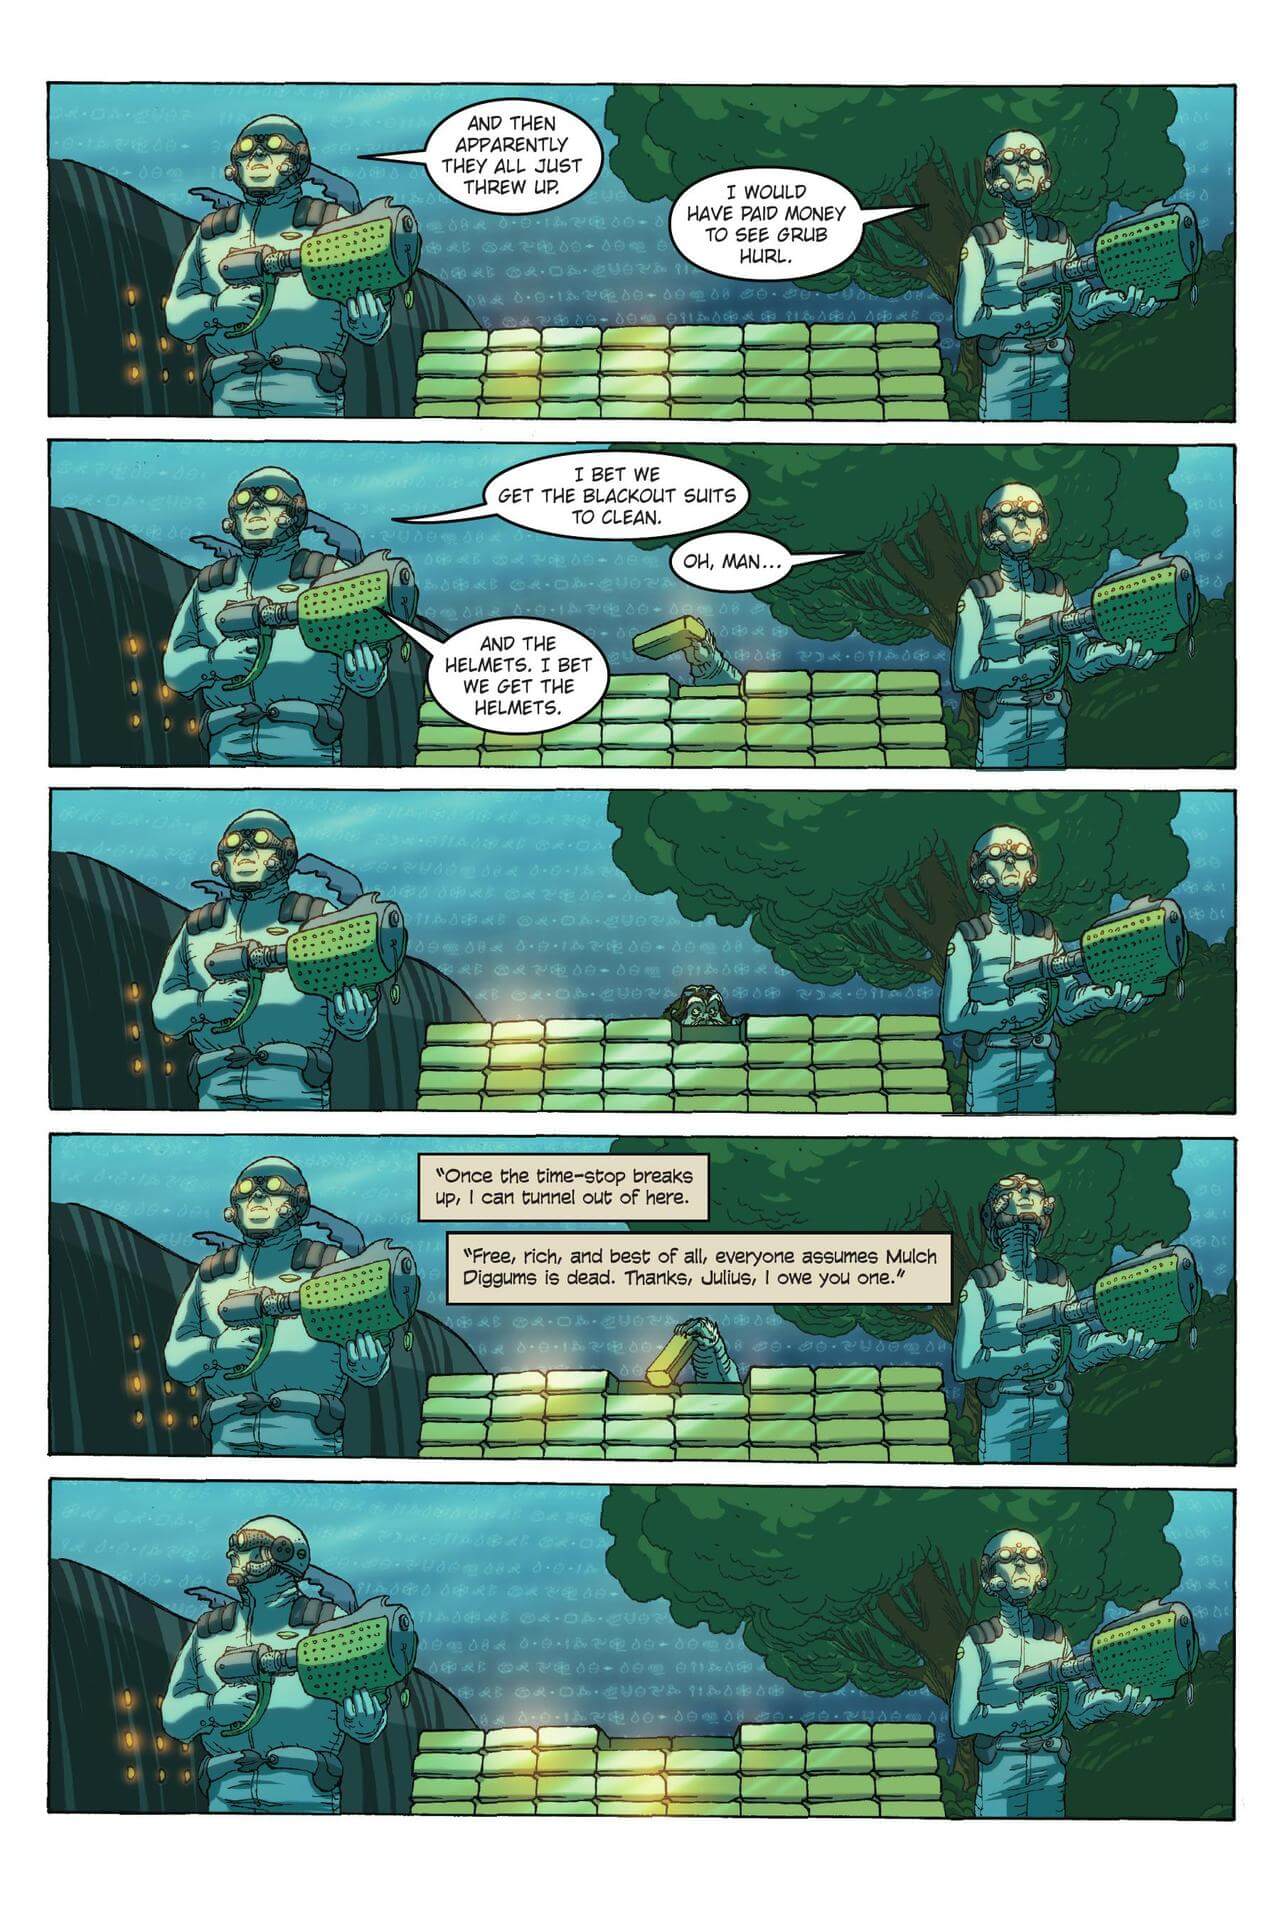 page 107 of artemis fowl the graphic novel